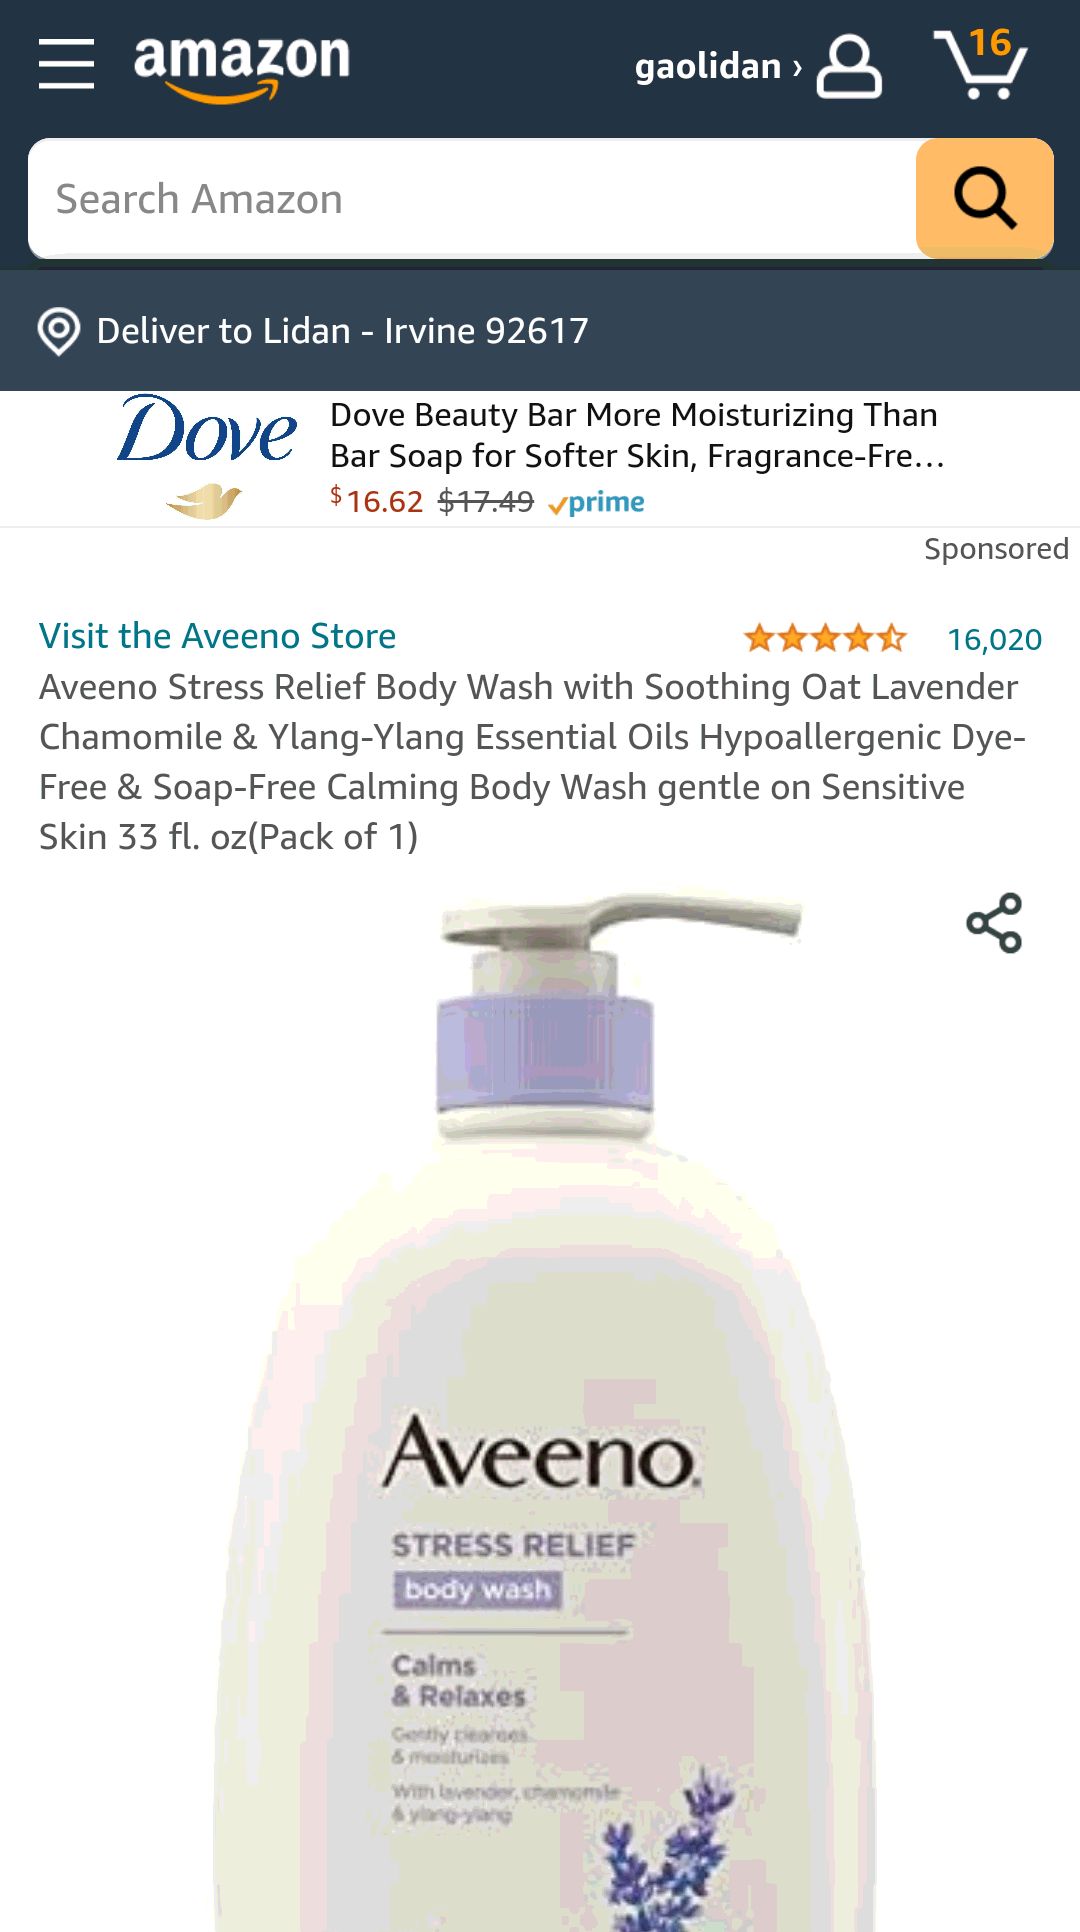 Aveeno Stress Relief Body Wash with Soothing Oat Lavender Chamomile & Ylang-Ylang Essential Oils Hypoallergenic Dye-Free & Soap-Free Calming Body Wash gentle on Sensitive Skin 33 fl. oz舒缓沐浴露